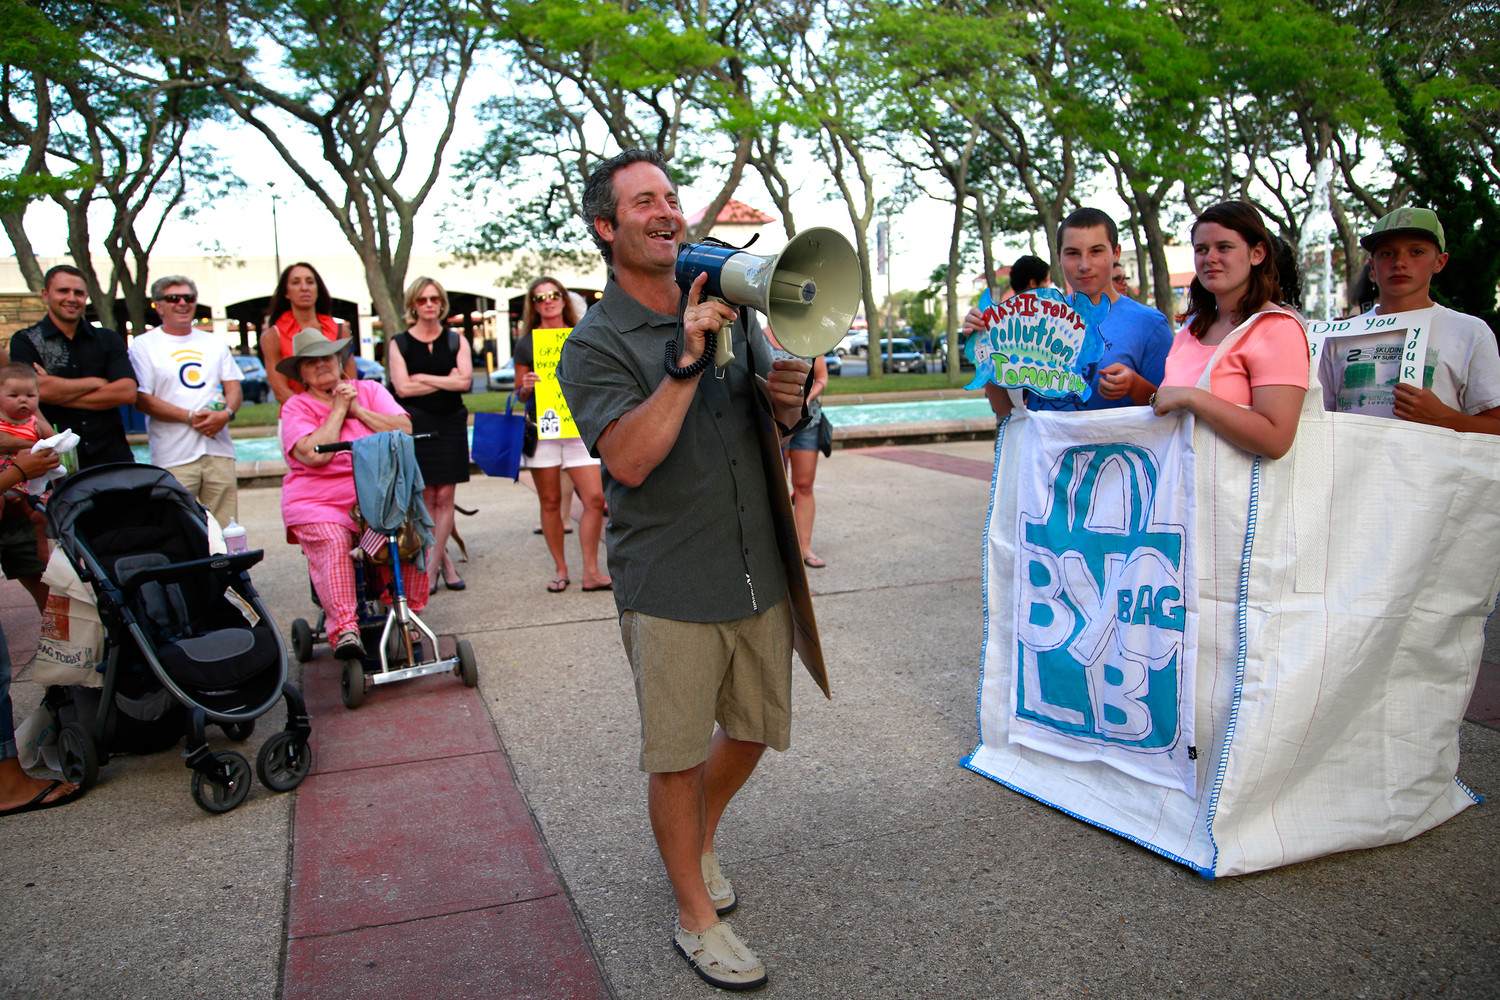 George Povall, of All Our Energy, led a rally in Long Beach in 2016, ultimately leading to a fee on single-use plastic bags.  A similar campaign is brewing in Rockville Centre.